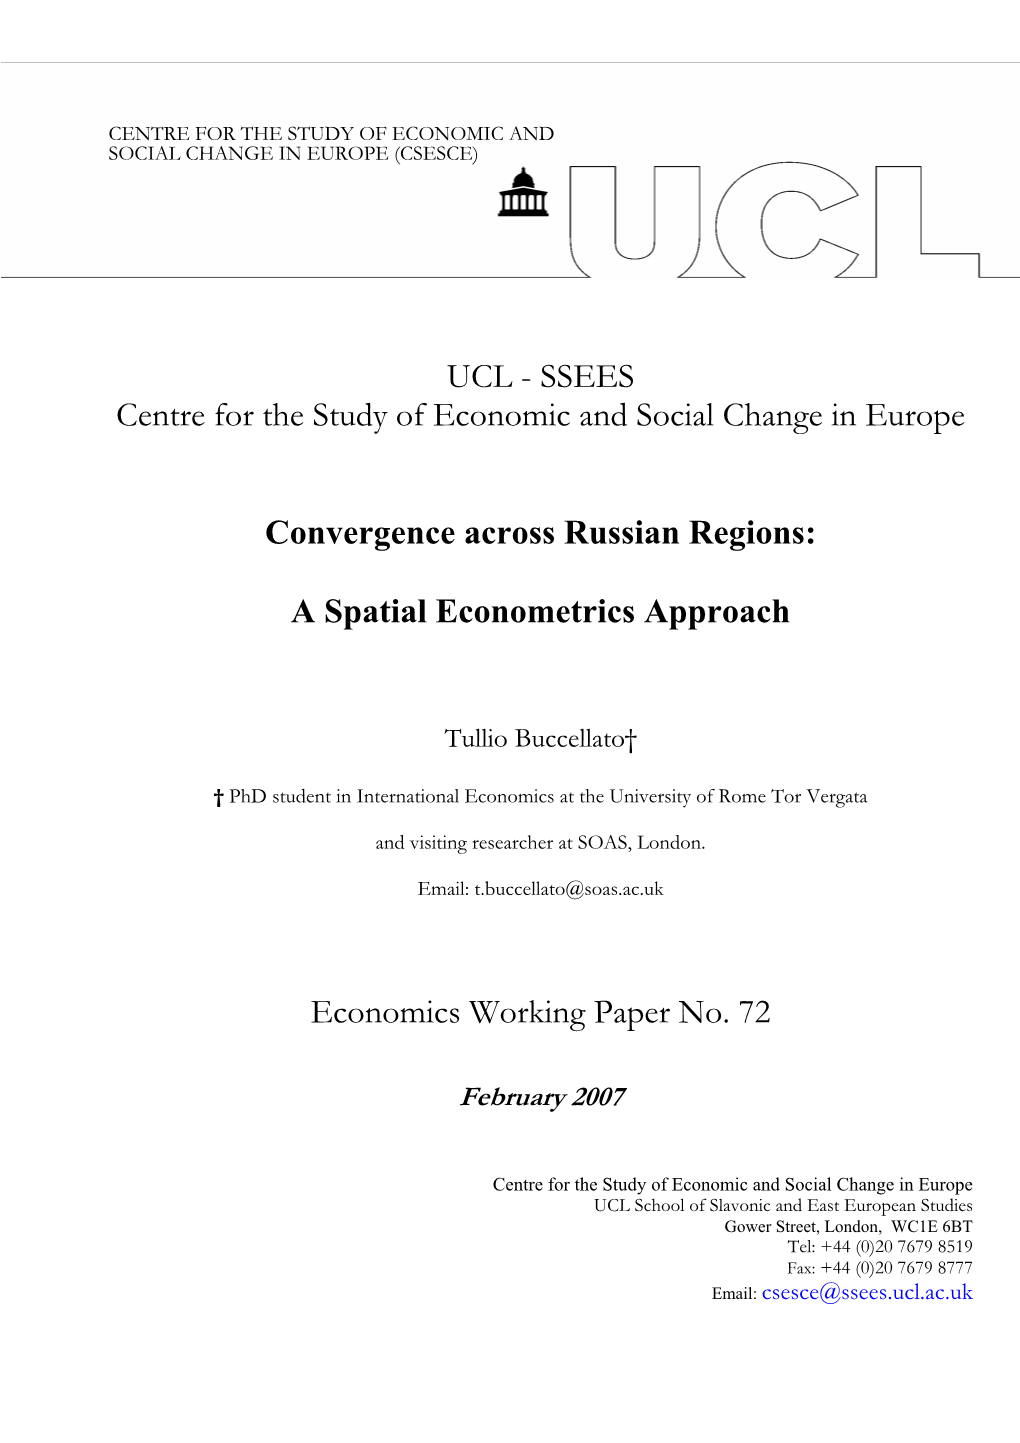 UCL - SSEES Centre for the Study of Economic and Social Change in Europe